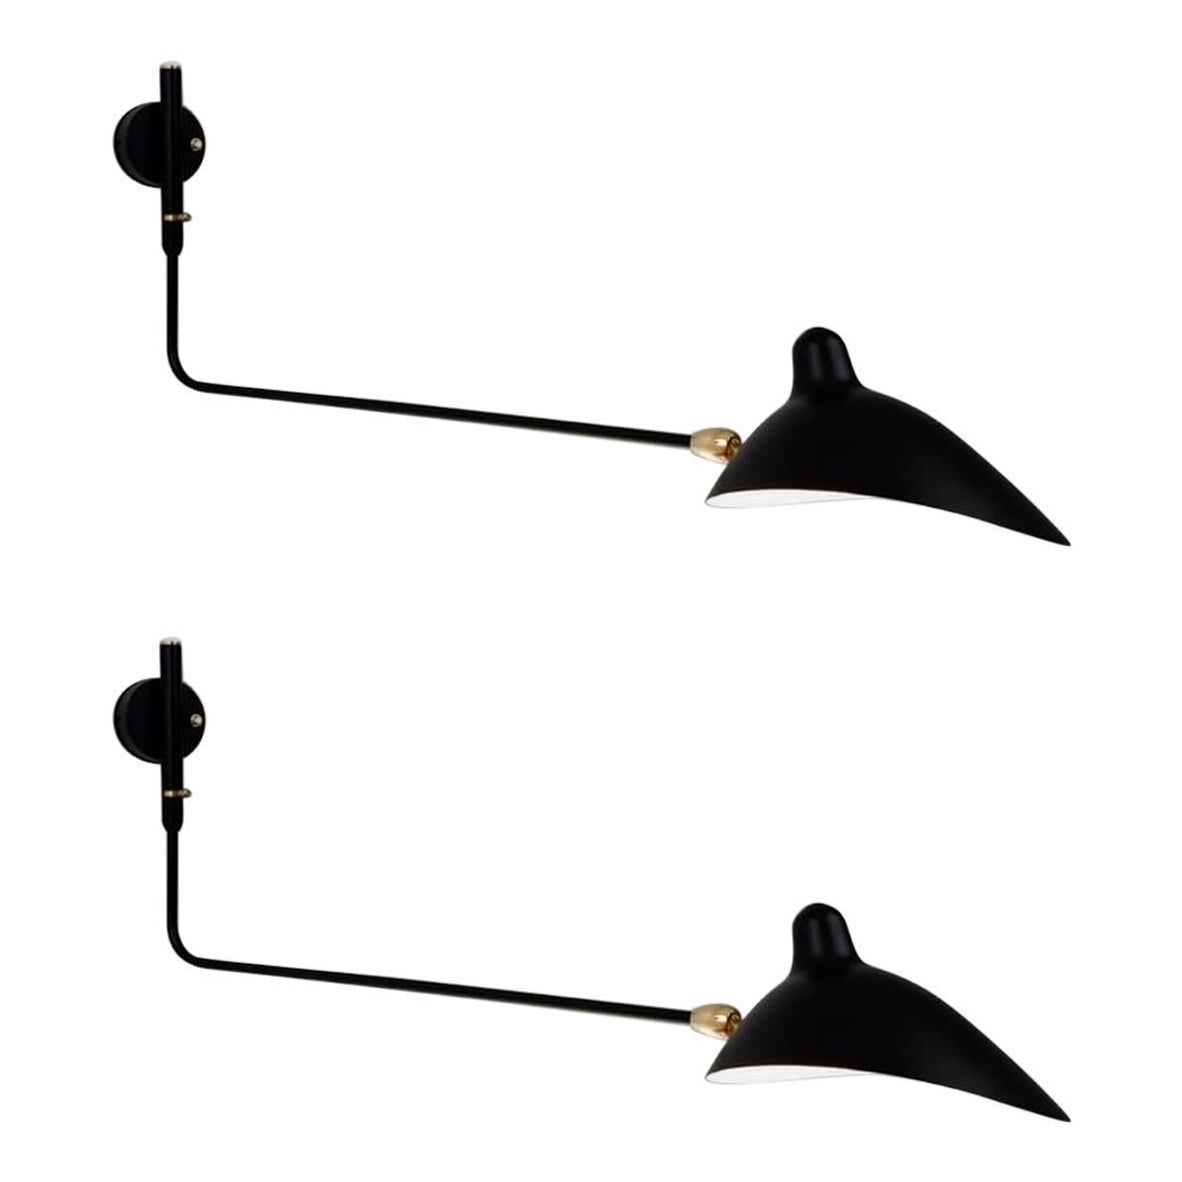 Serge Mouille - Pair of Rotating Sconces with 1 Arm in Black - IN STOCK!